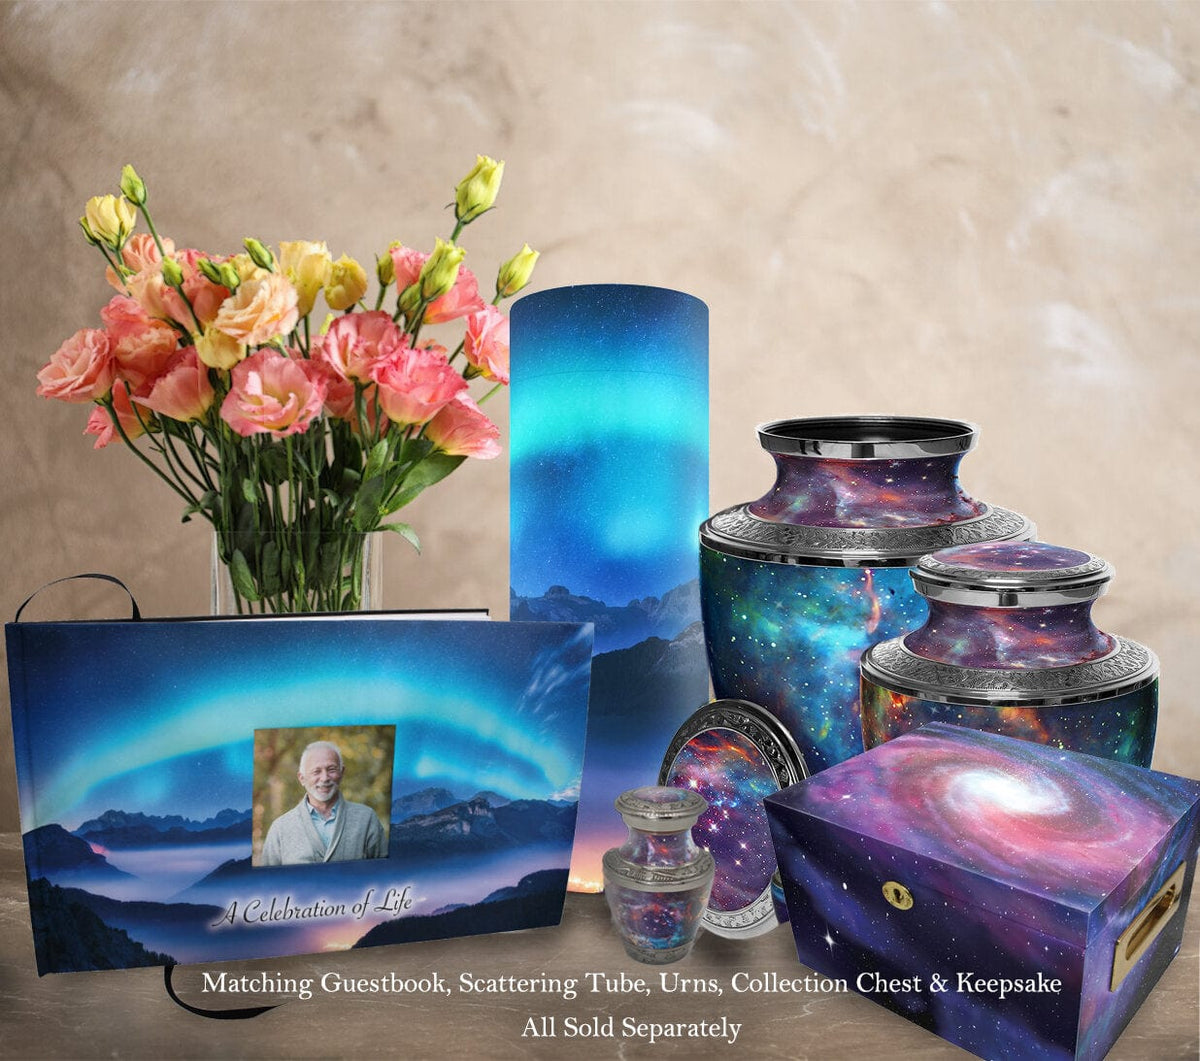 Commemorative Cremation Urns Aurora Borealis Matching Themed &#39;Celebration of Life&#39; Guest Book for Funeral or Memorial Service